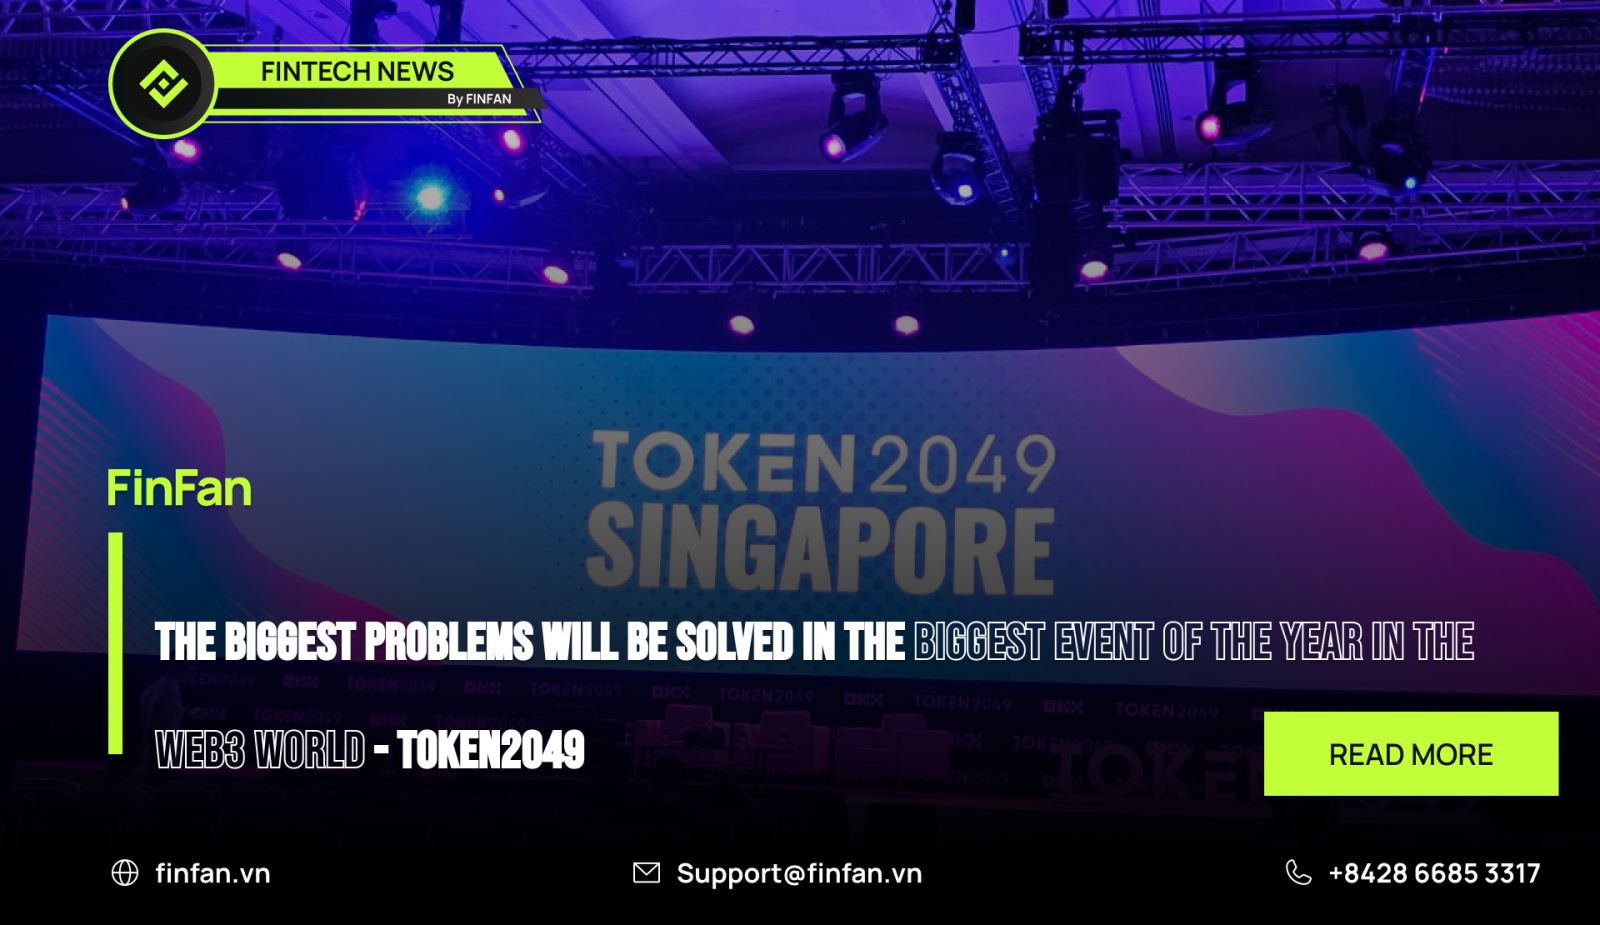 The biggest problems will be solved in the biggest event of the year in the Web3 world - TOKEN2049